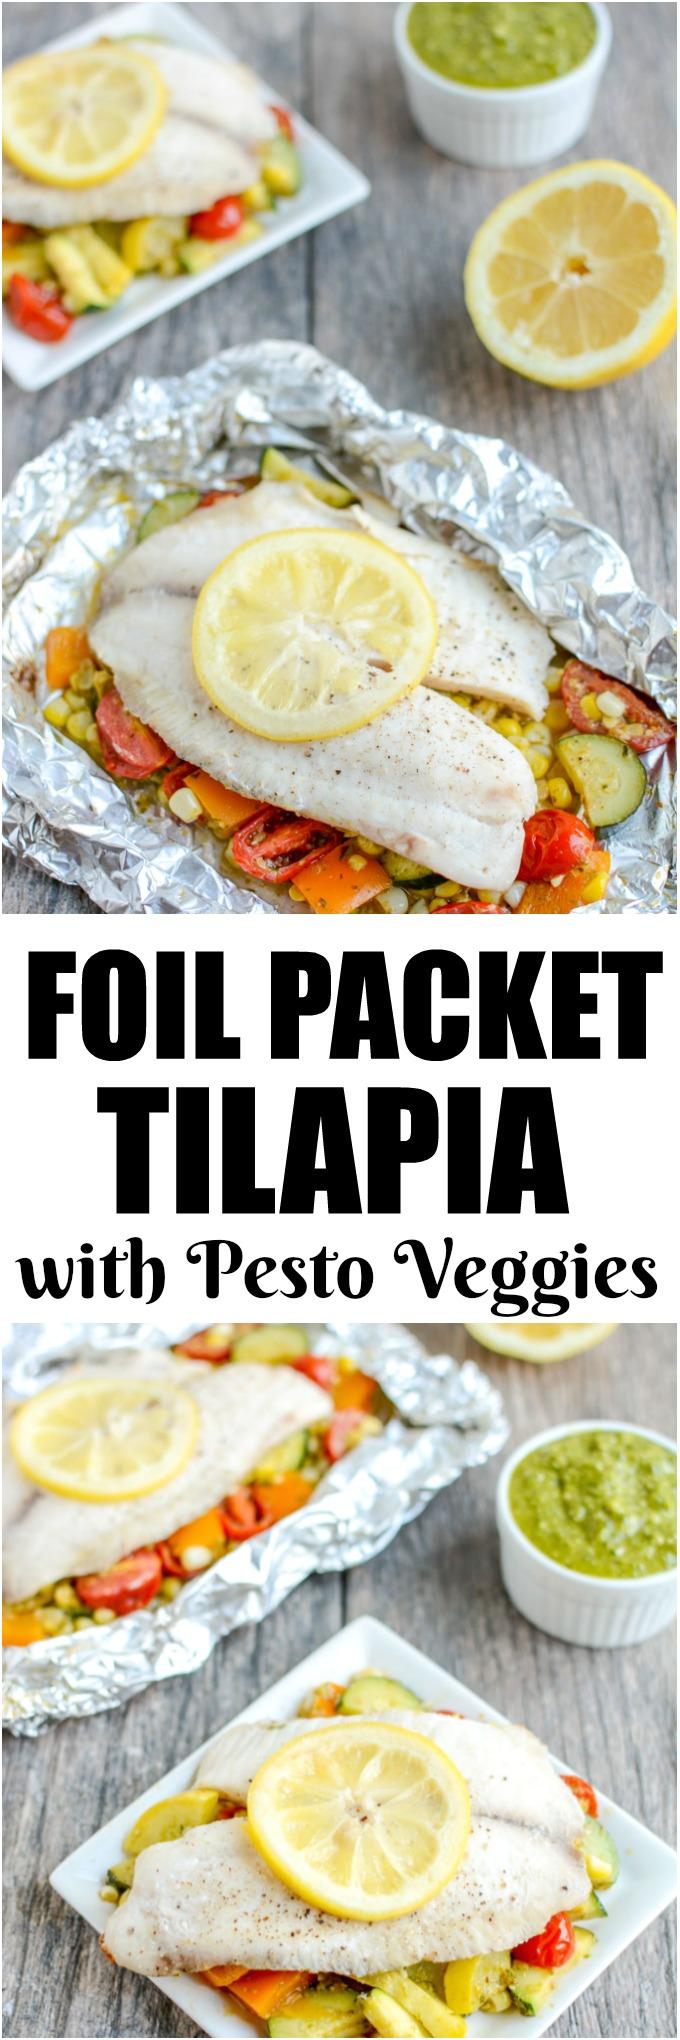 This recipe for Grilled Foil Packet Tilapia with Pesto Veggies is perfect for a summer dinner! It's quick, easy and healthy, plus cleanup is a breeze!